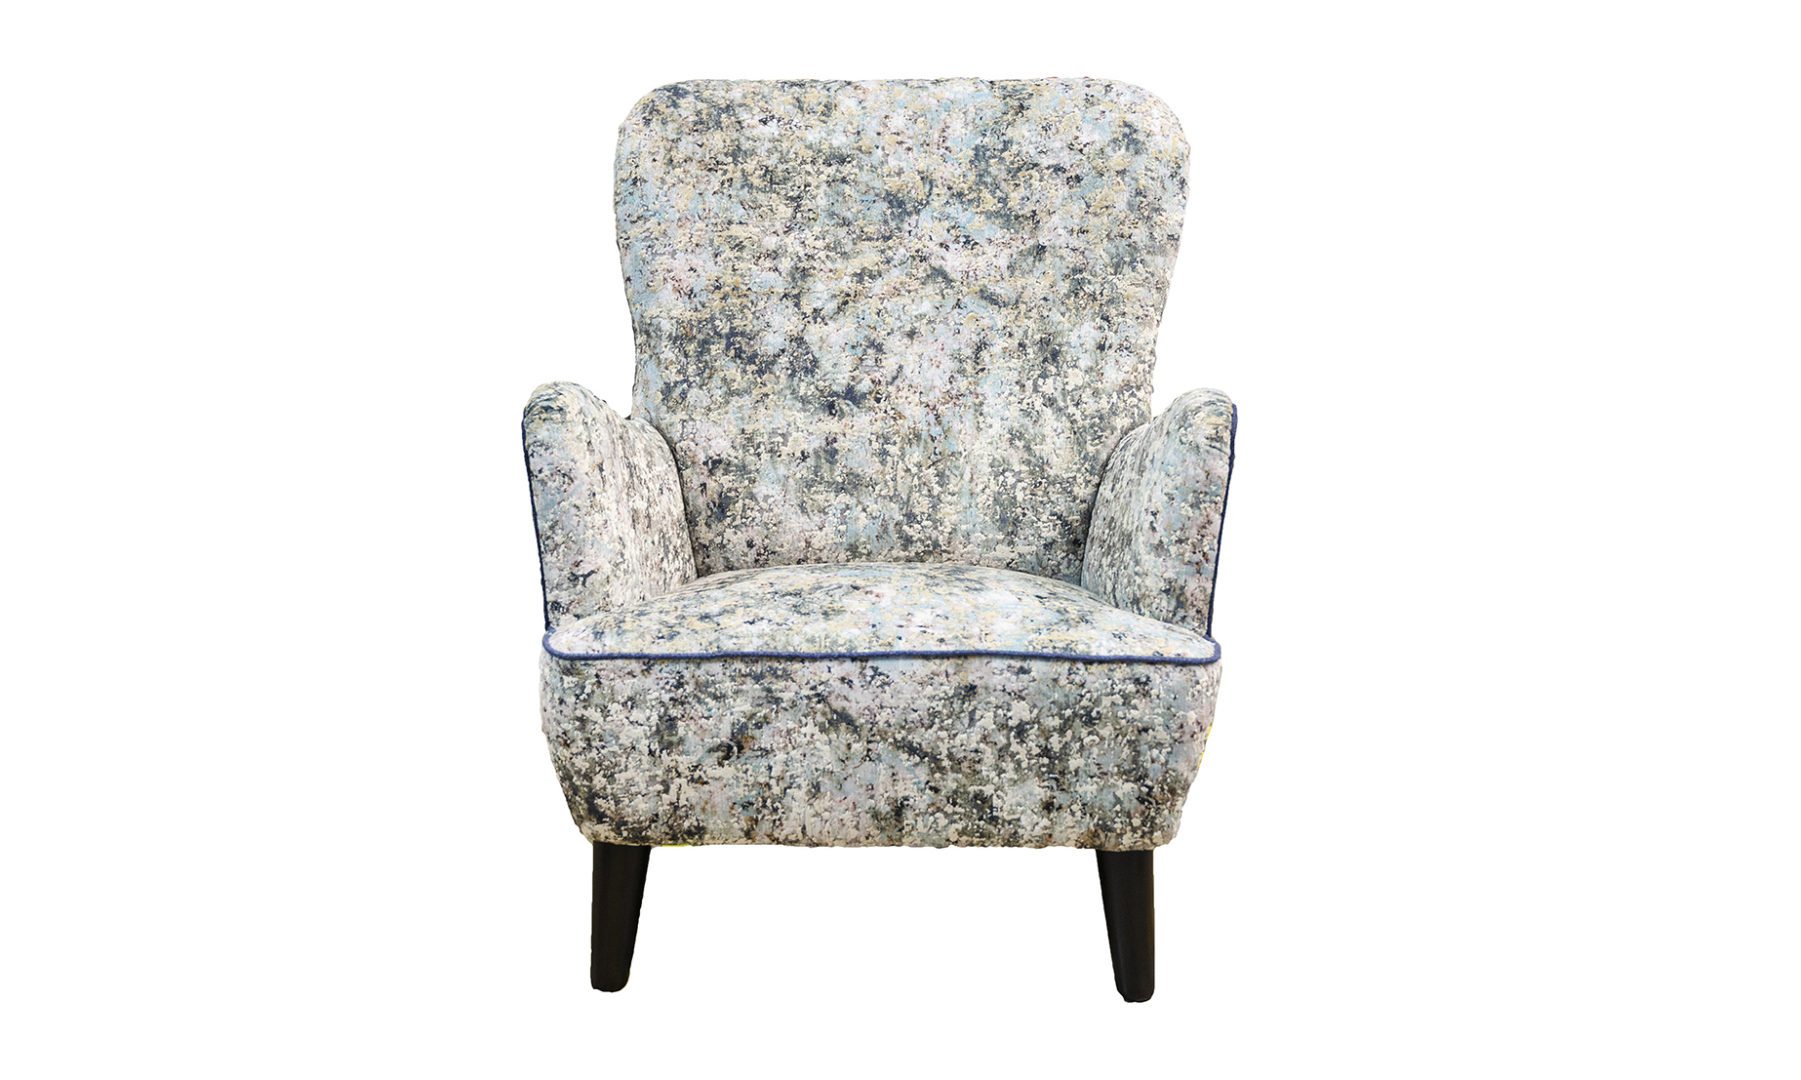 Holly Chair in Igloo Ocean, Platinum Collection Fabric